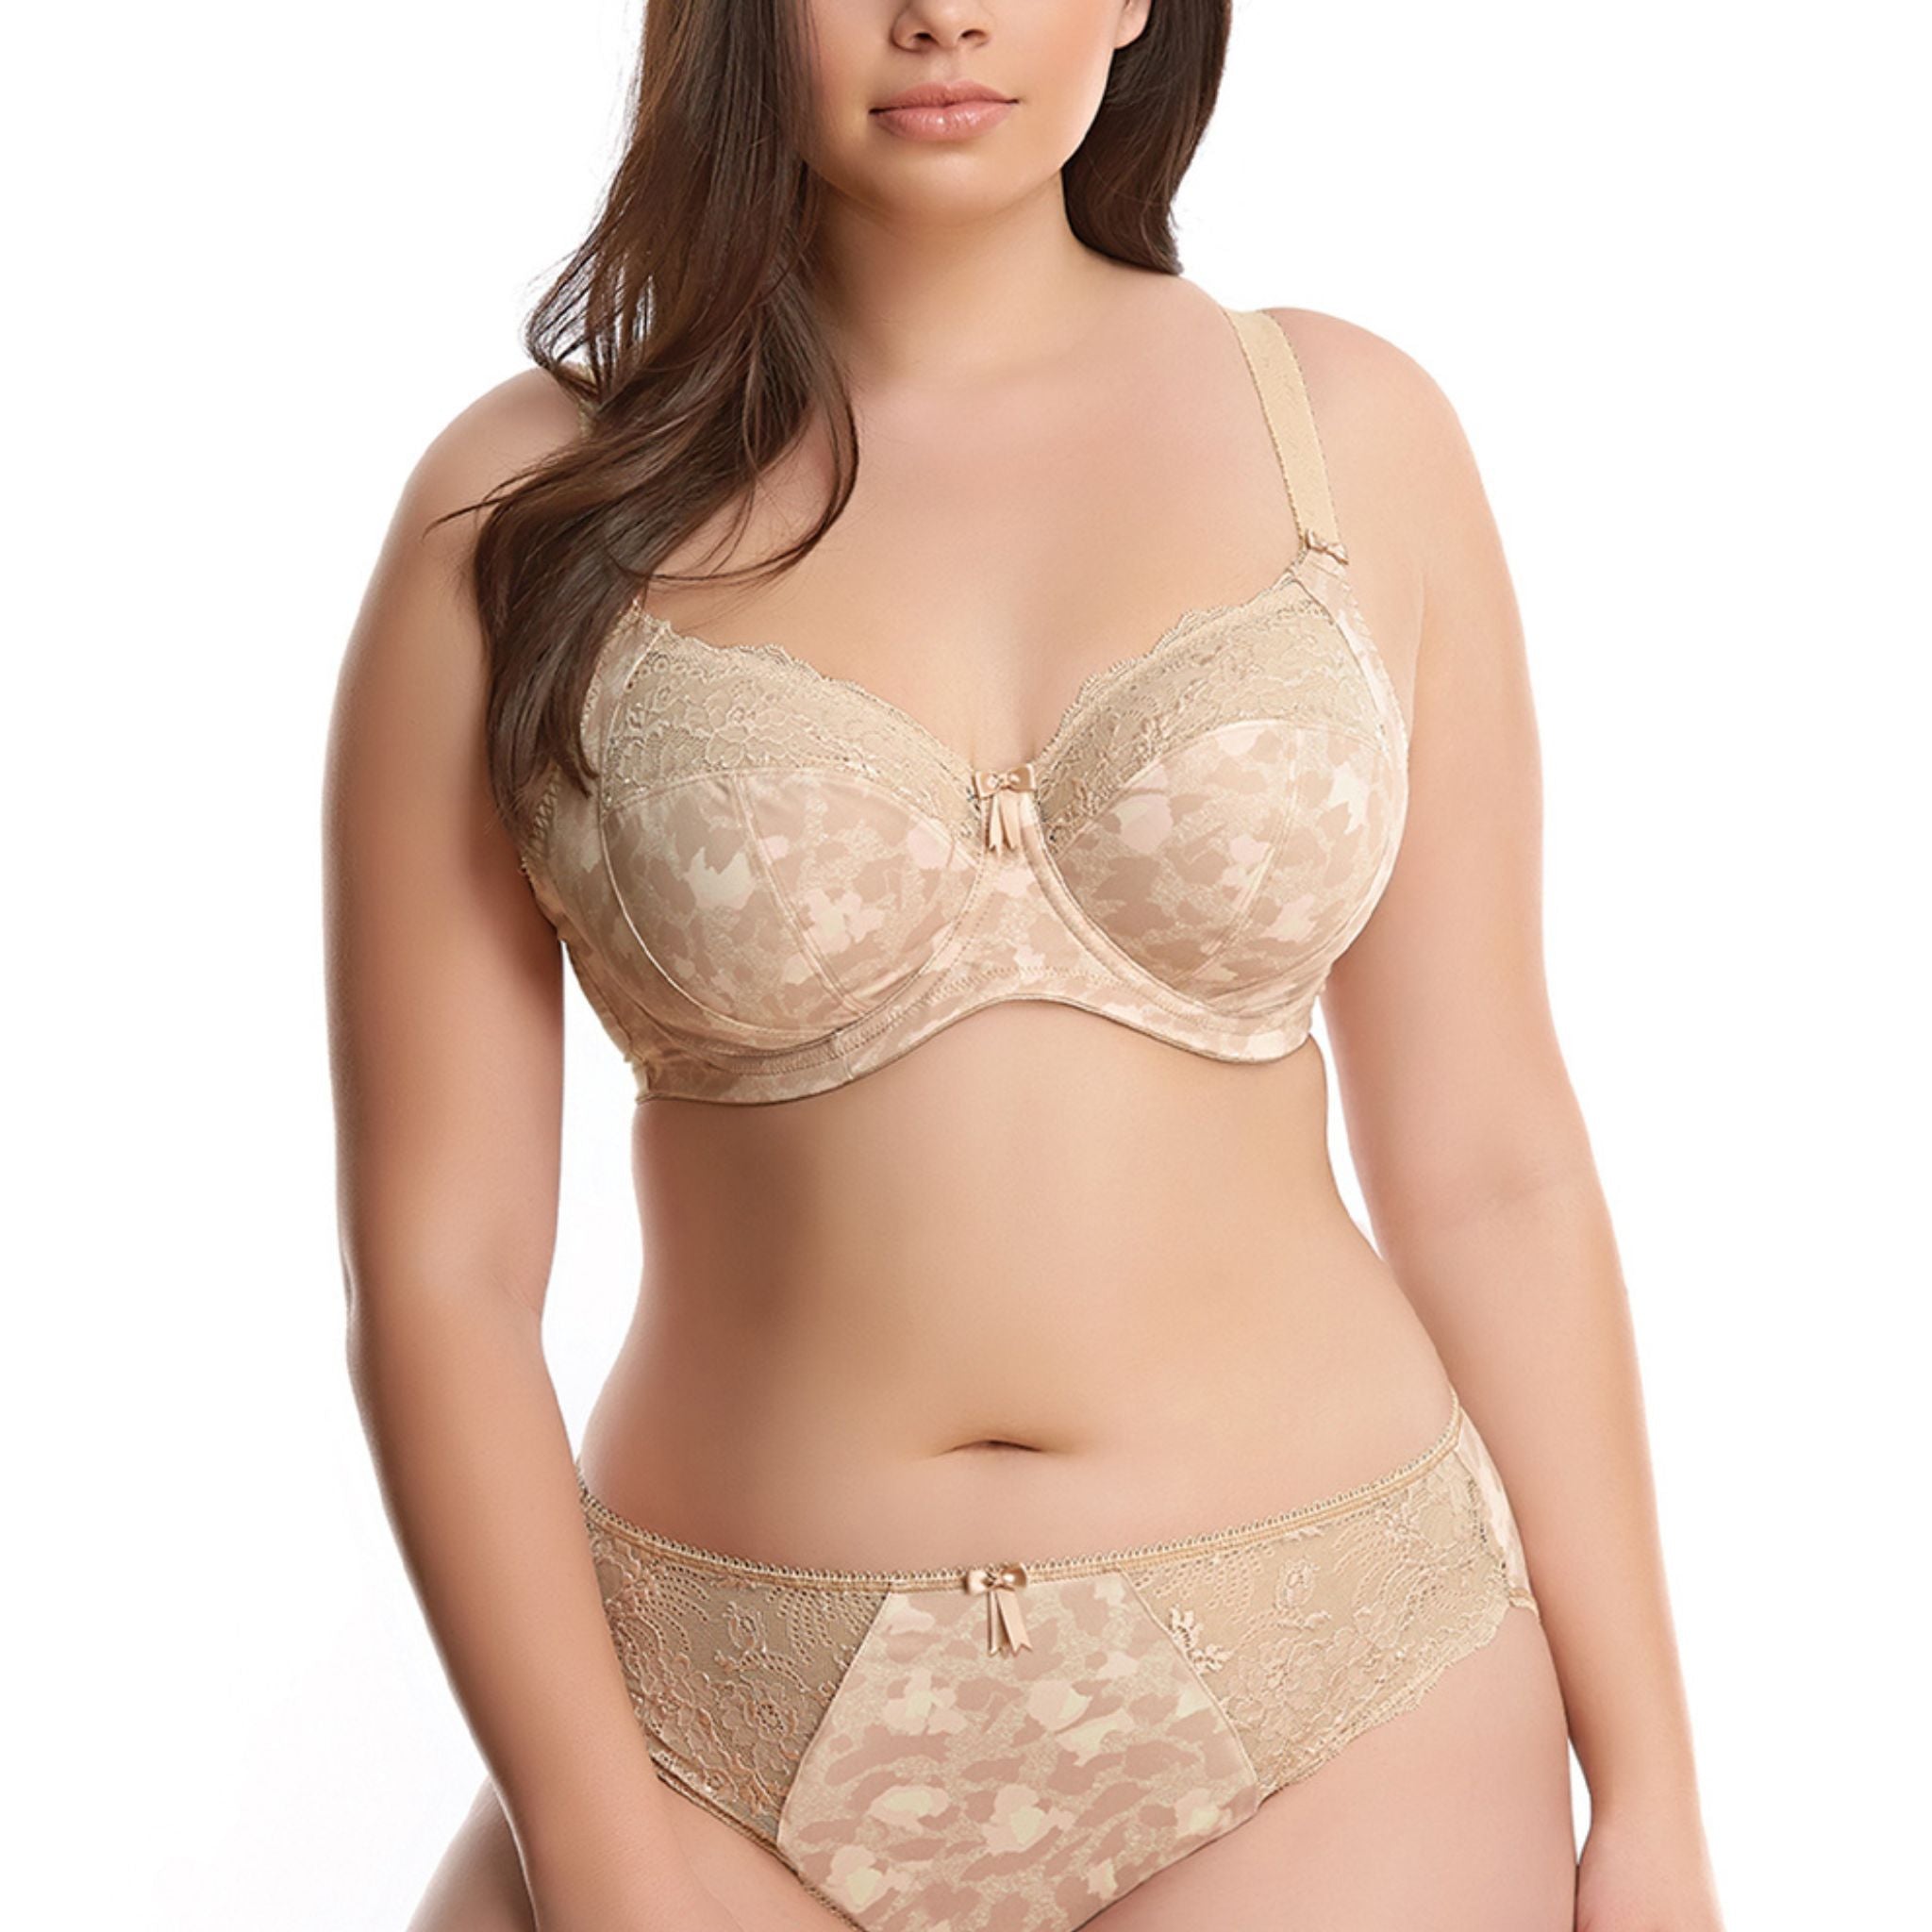 Let your wild side out with the must-have Morgan collection, the everyday Banded Bra in Toasted Almond features a subtle animal print with matching stretch lace. The three section cups plus side frame offers sublime support and shape in sizes DD – K.  Three-piece cups plus side support offers perfect forward shape  Stretch lace top cups create a rounded shape  Elasticated neck edge for ease of fit  Complete with a pretty bow detail